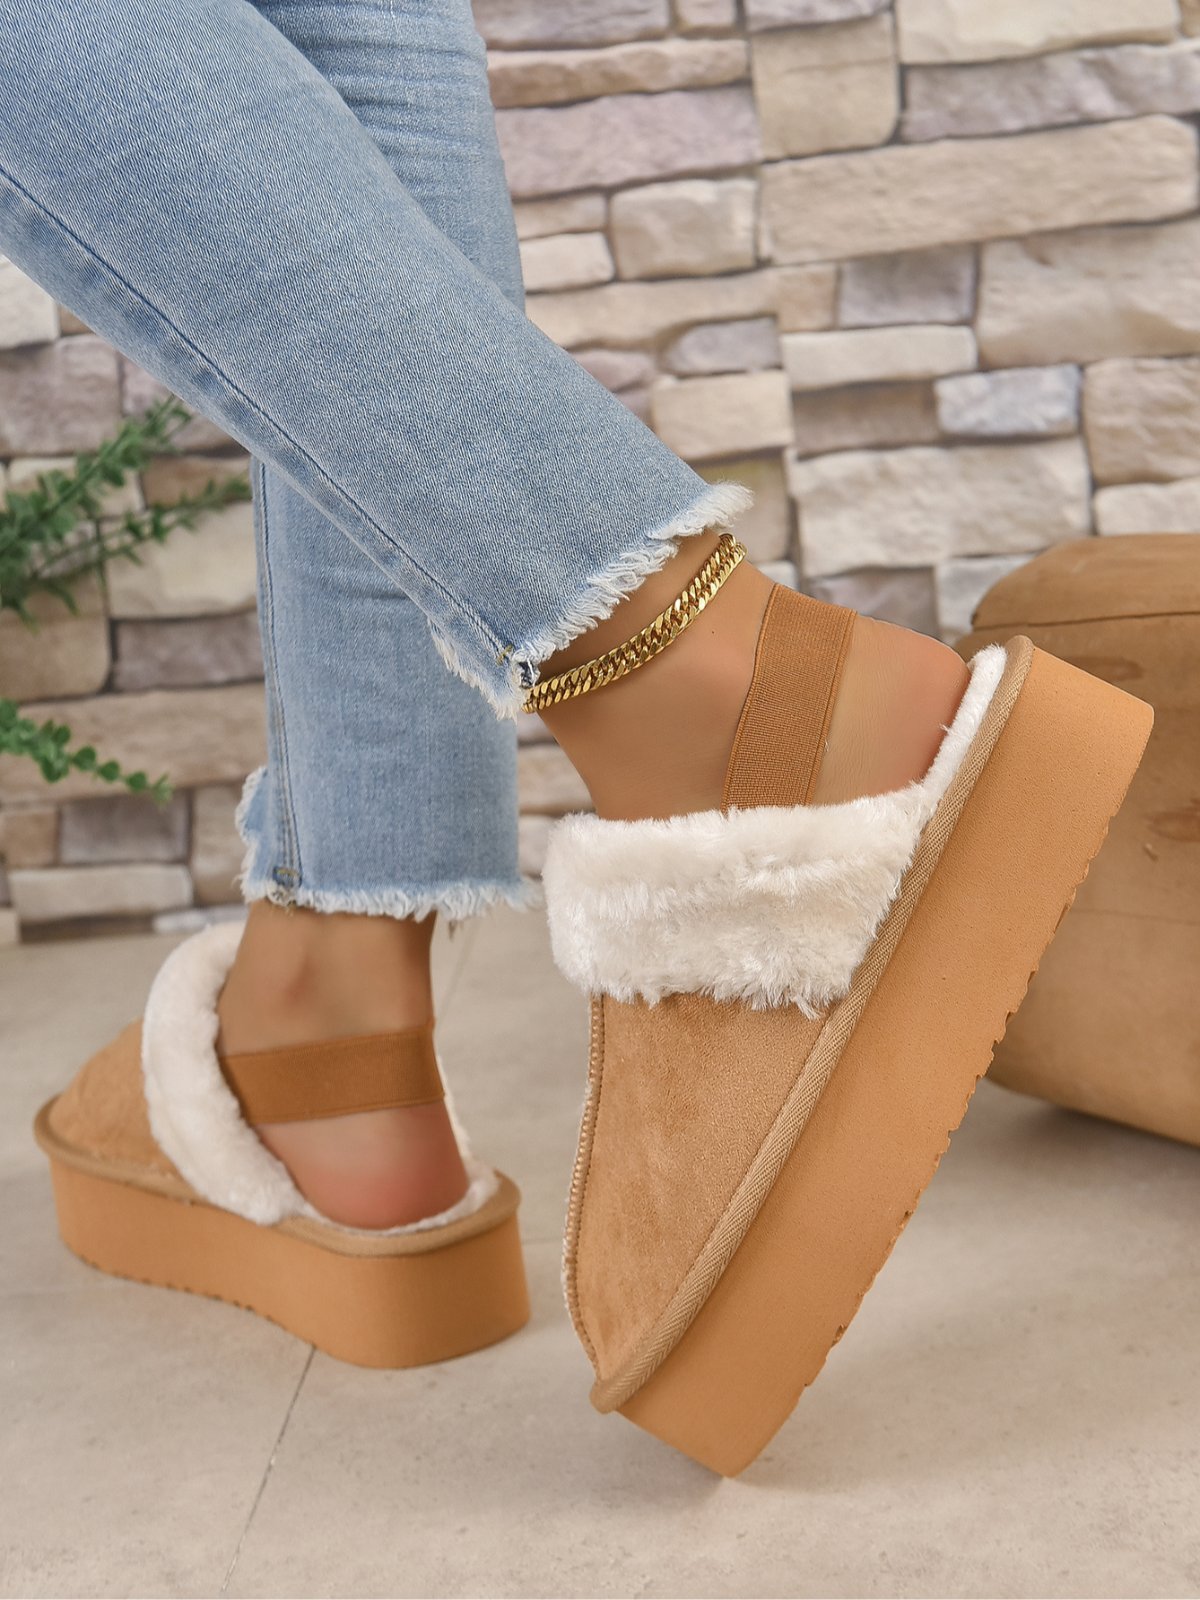 Casual Faux Suede Warmth Furry Platform Slingback Shoes